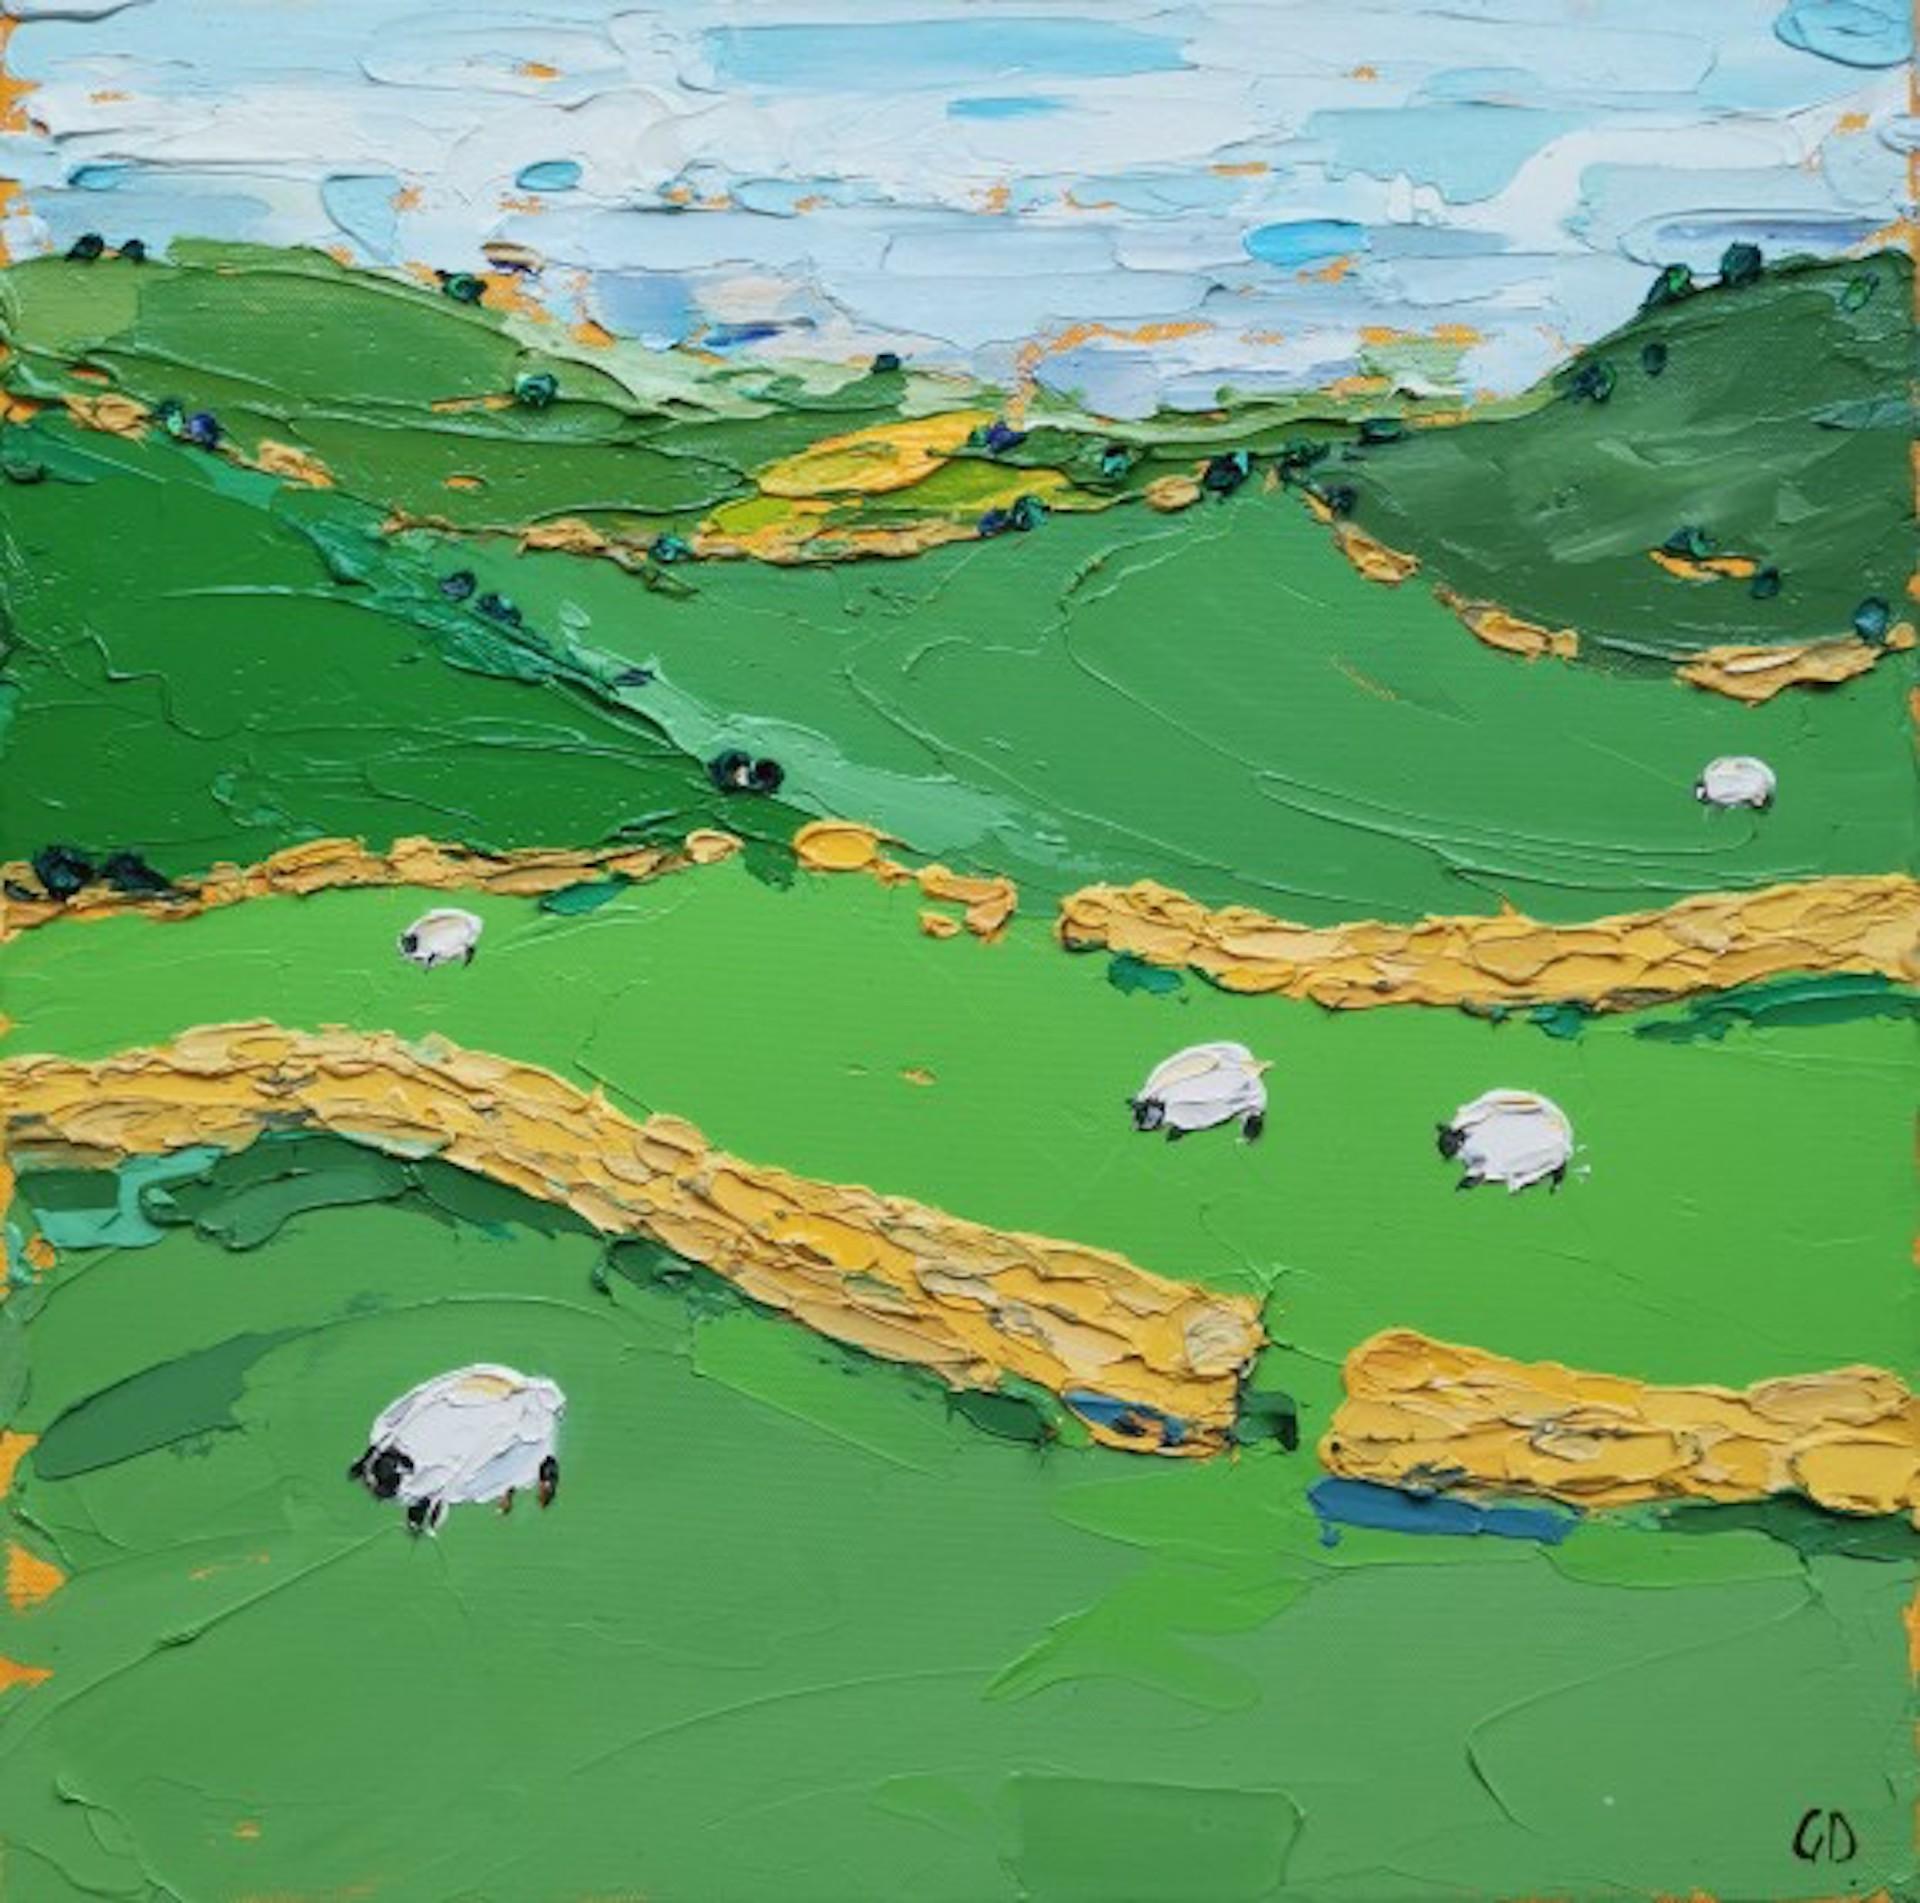 Georgie Dowling
Through the Hills
Original
Landscapes
Oil paint on canvas
Canvas Size: H:40 cm x W:40 cm x D:2cm
Sold Unframed
Please note that insitu images are purely an indication of how a piece may look

'Through the hills’ is an original